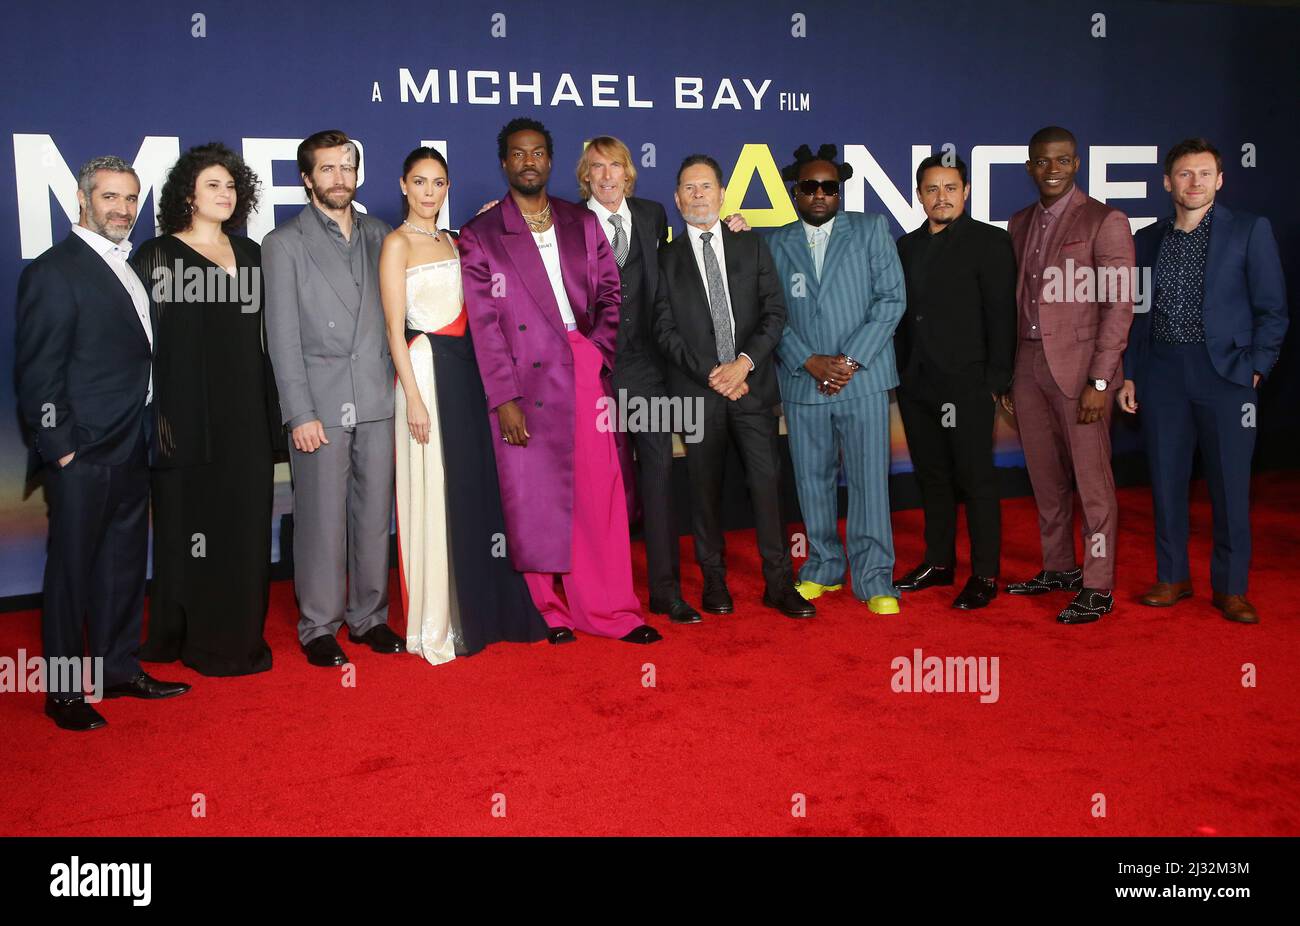 Los Angeles, Ca. 4th Apr, 2022. Michael Käse, Brad Fischer, Olivia Stambouliah, Eiza Gonzalez, Jake Gyllenhaal, Yahya Abdul-Mateen II, Michael Bay, A Martinez, Jesse Garcia, Cedric Sanders, Keir O'Donnell, at the premiere Ambulance at The Academy Museum of Motion Pictures in Los Angeles, California on April 4, 2022. Credit: Faye Sadou/Media Punch/Alamy Live News Stock Photo